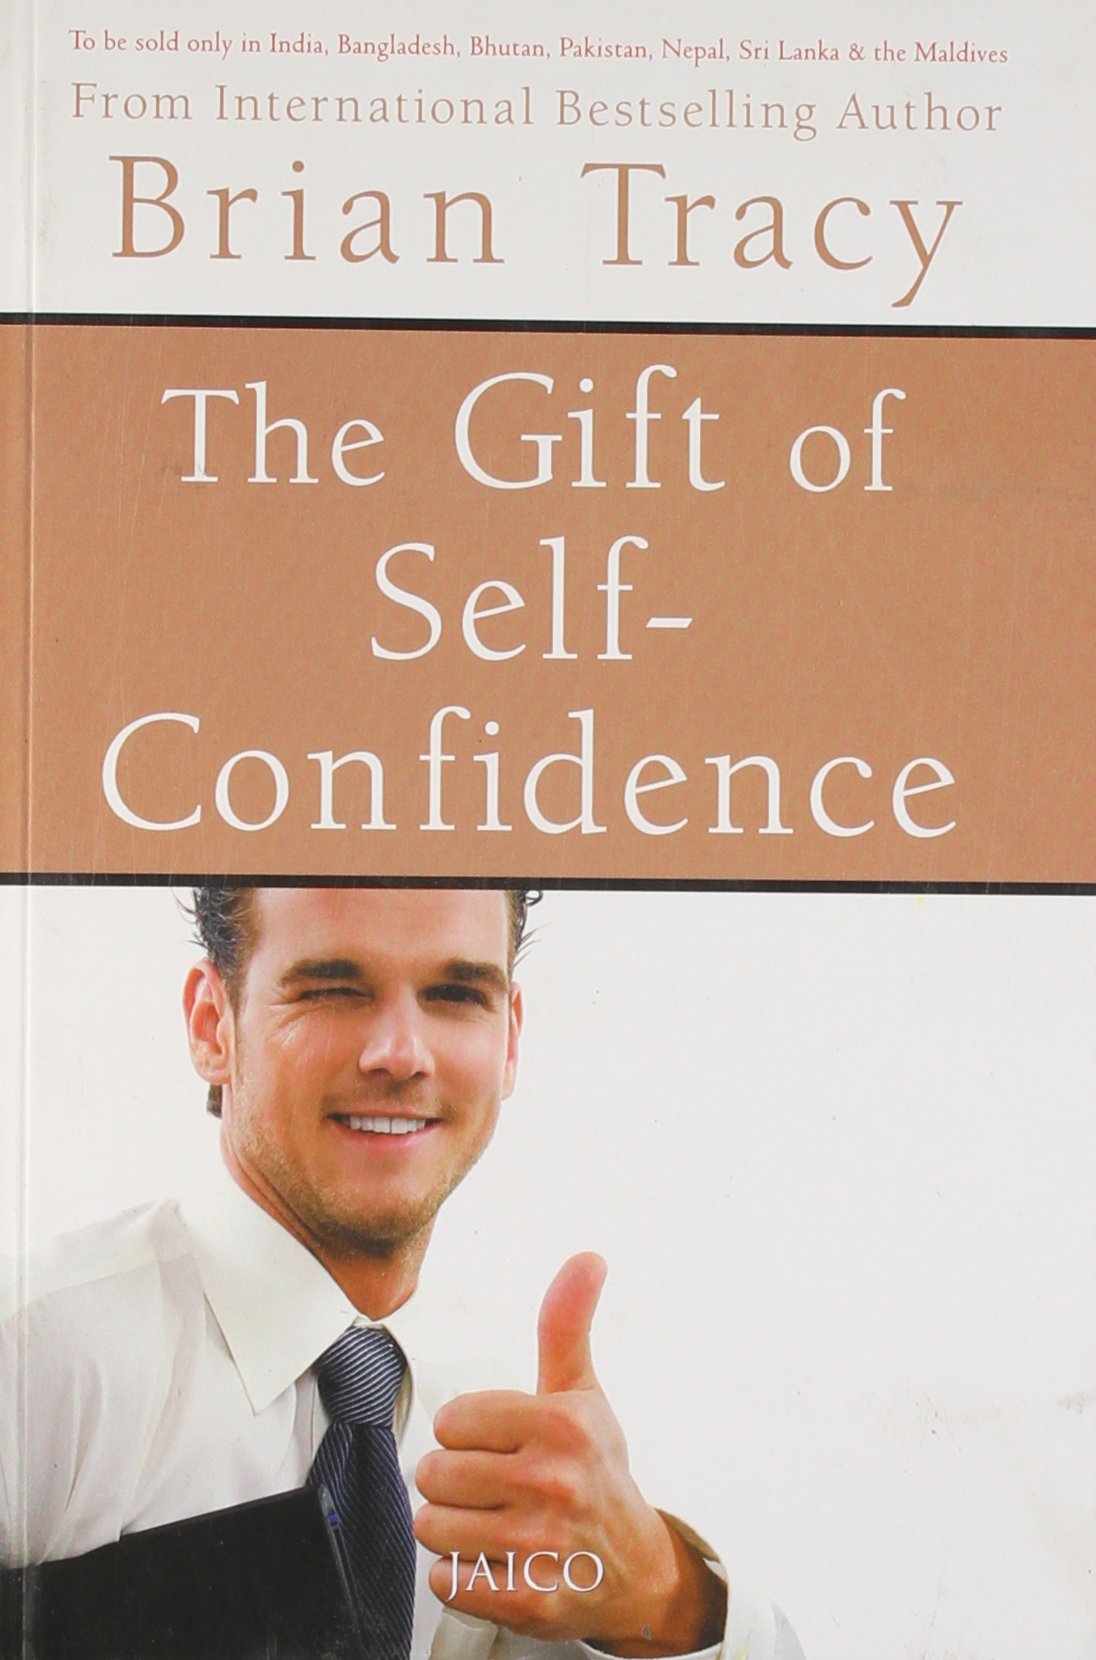 The Gift Of Self-Confidence